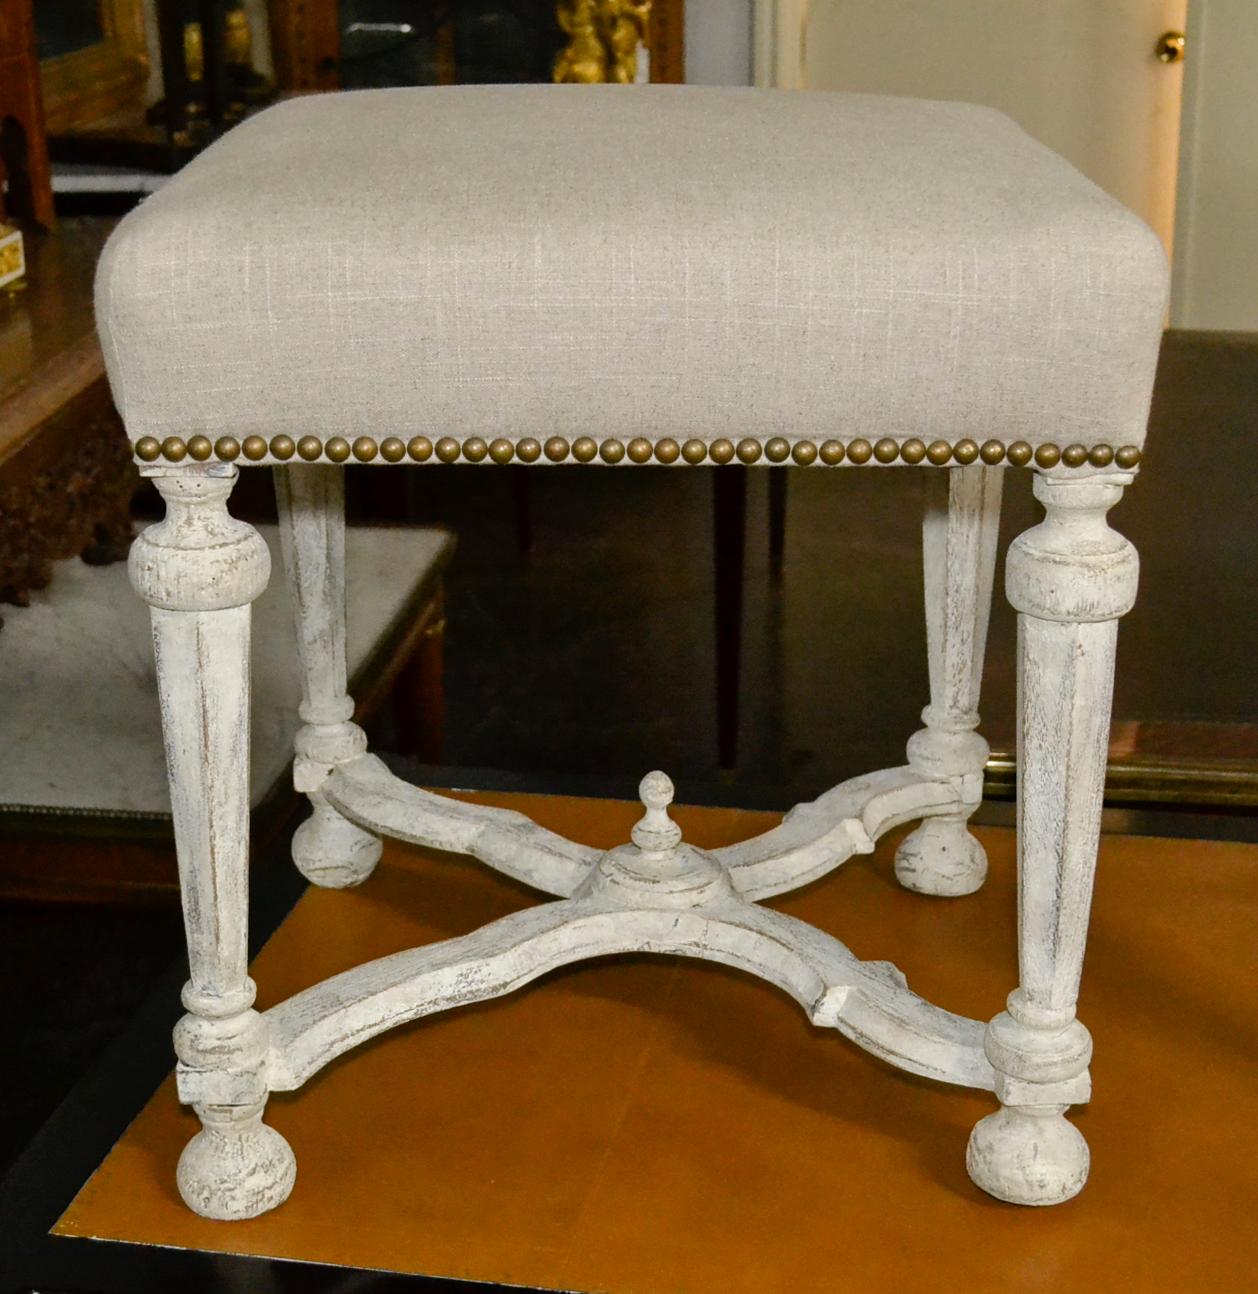 Wonderful pair of 19th century continental carved and painted benches with recent linen upholstery.